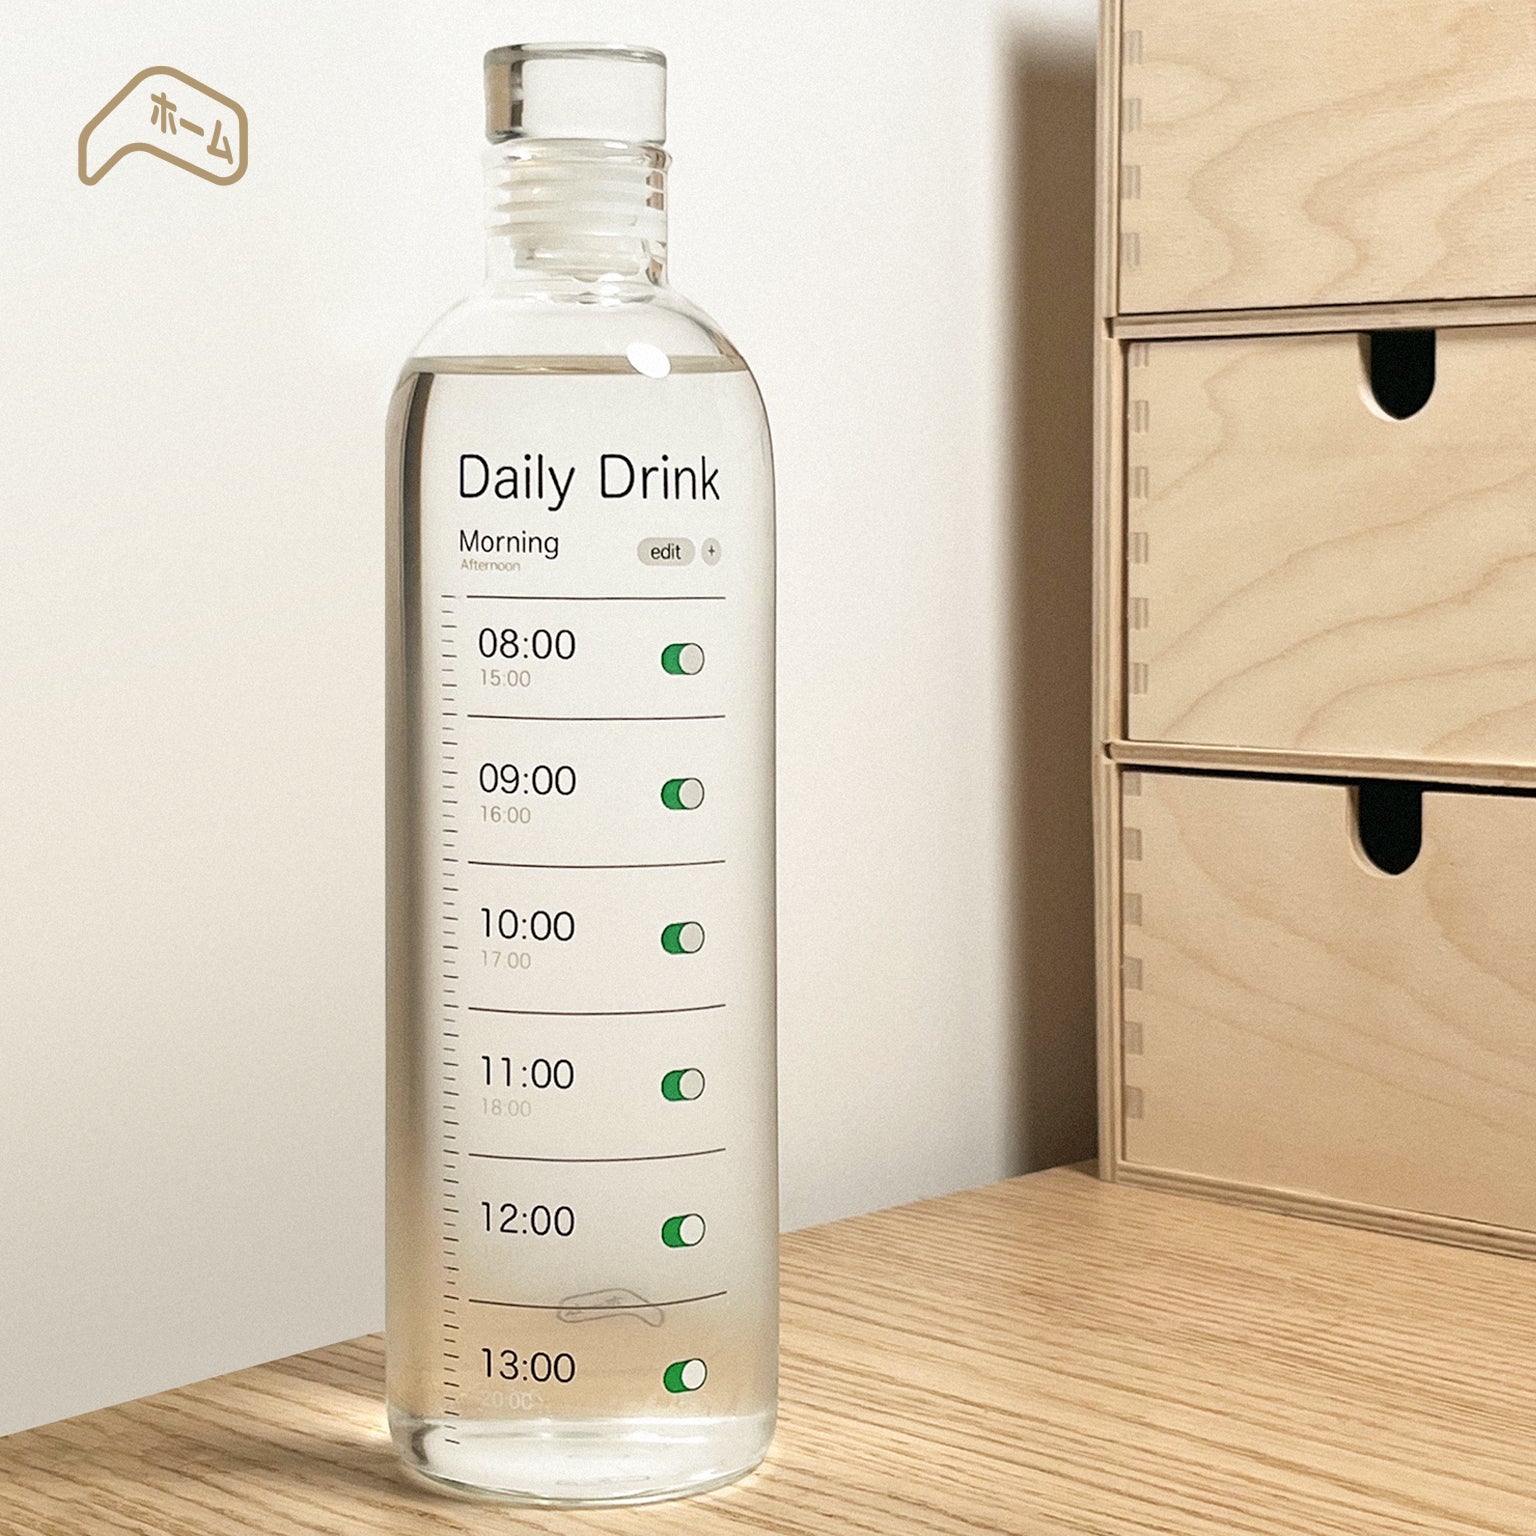 cas:pace home 「Daily Drink」ボトル - cas:pace 殼空間